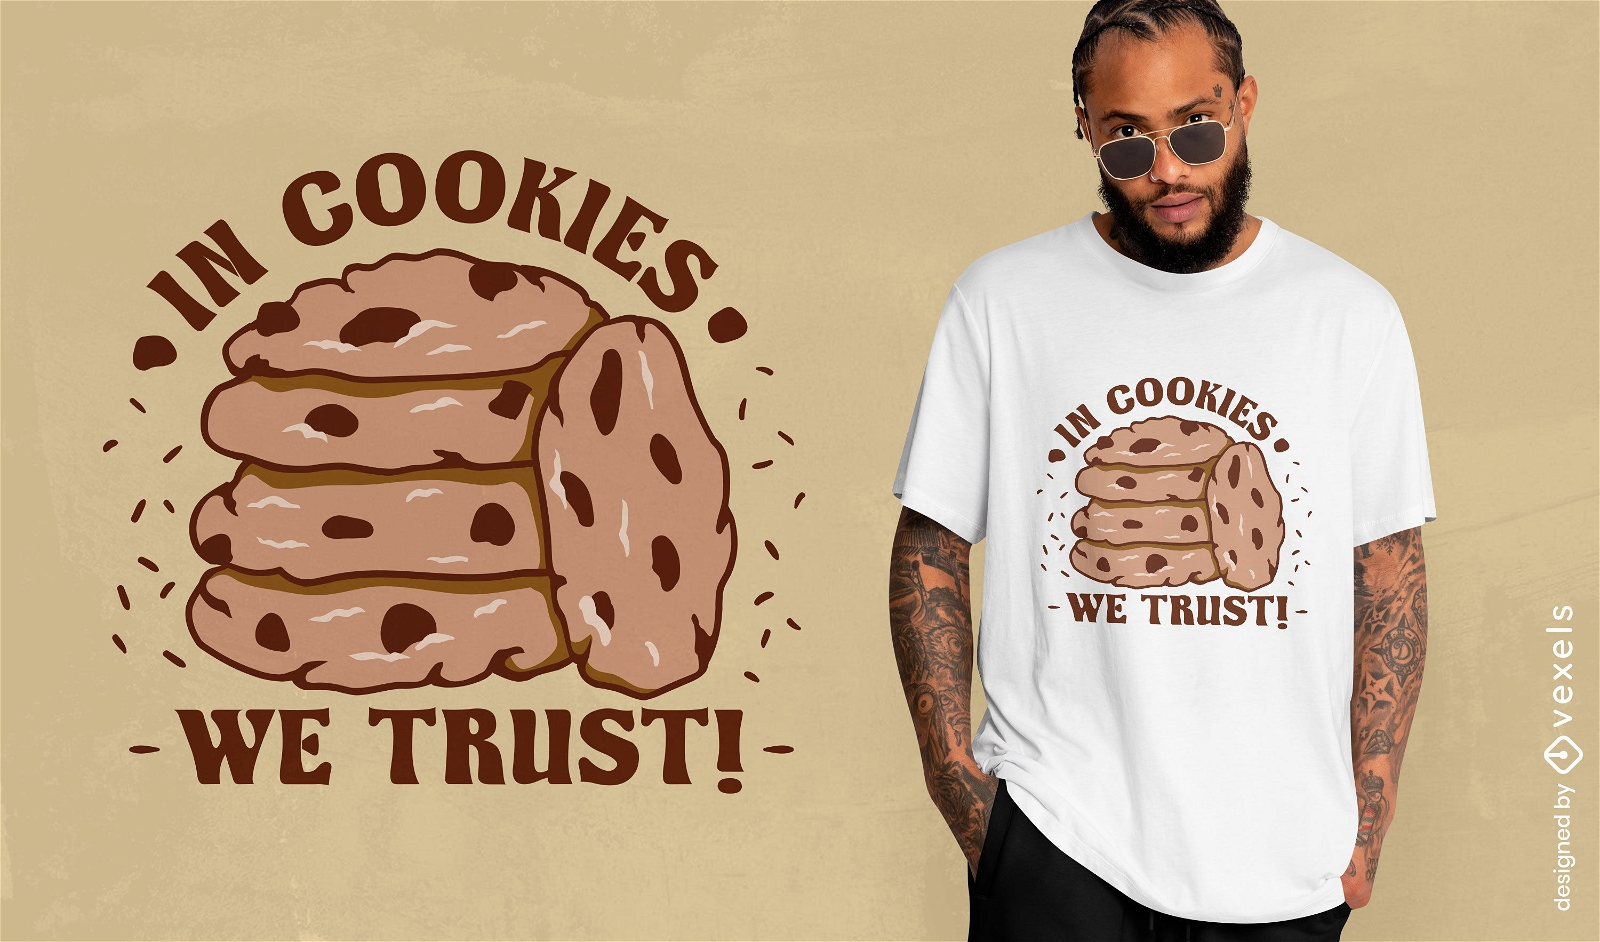 Whimsical cookie trust t-shirt design